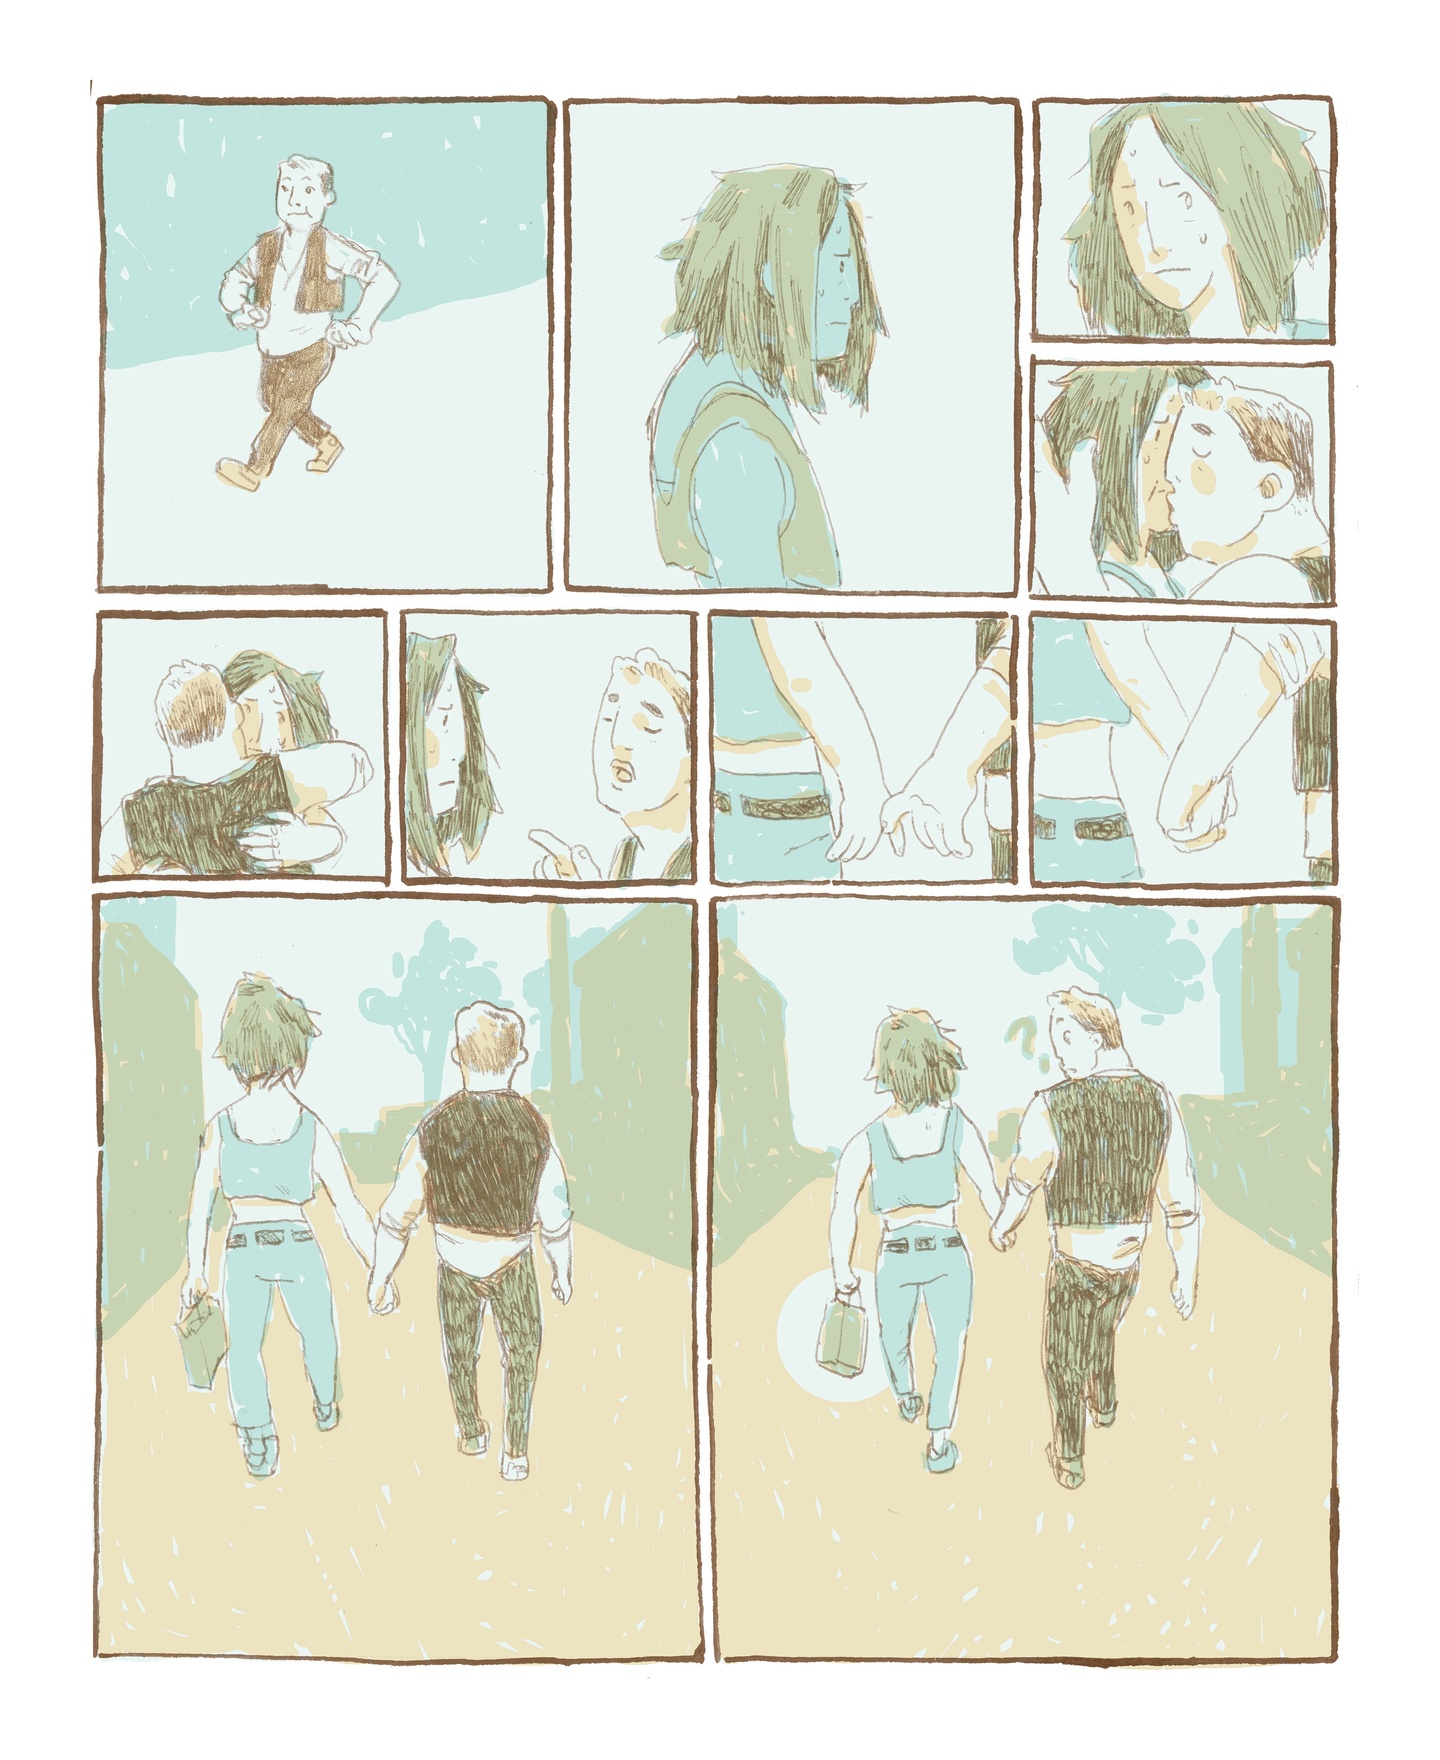 Comic page - the person in the tank top and the person in the vest meet, kiss, hold hands and walk away together.